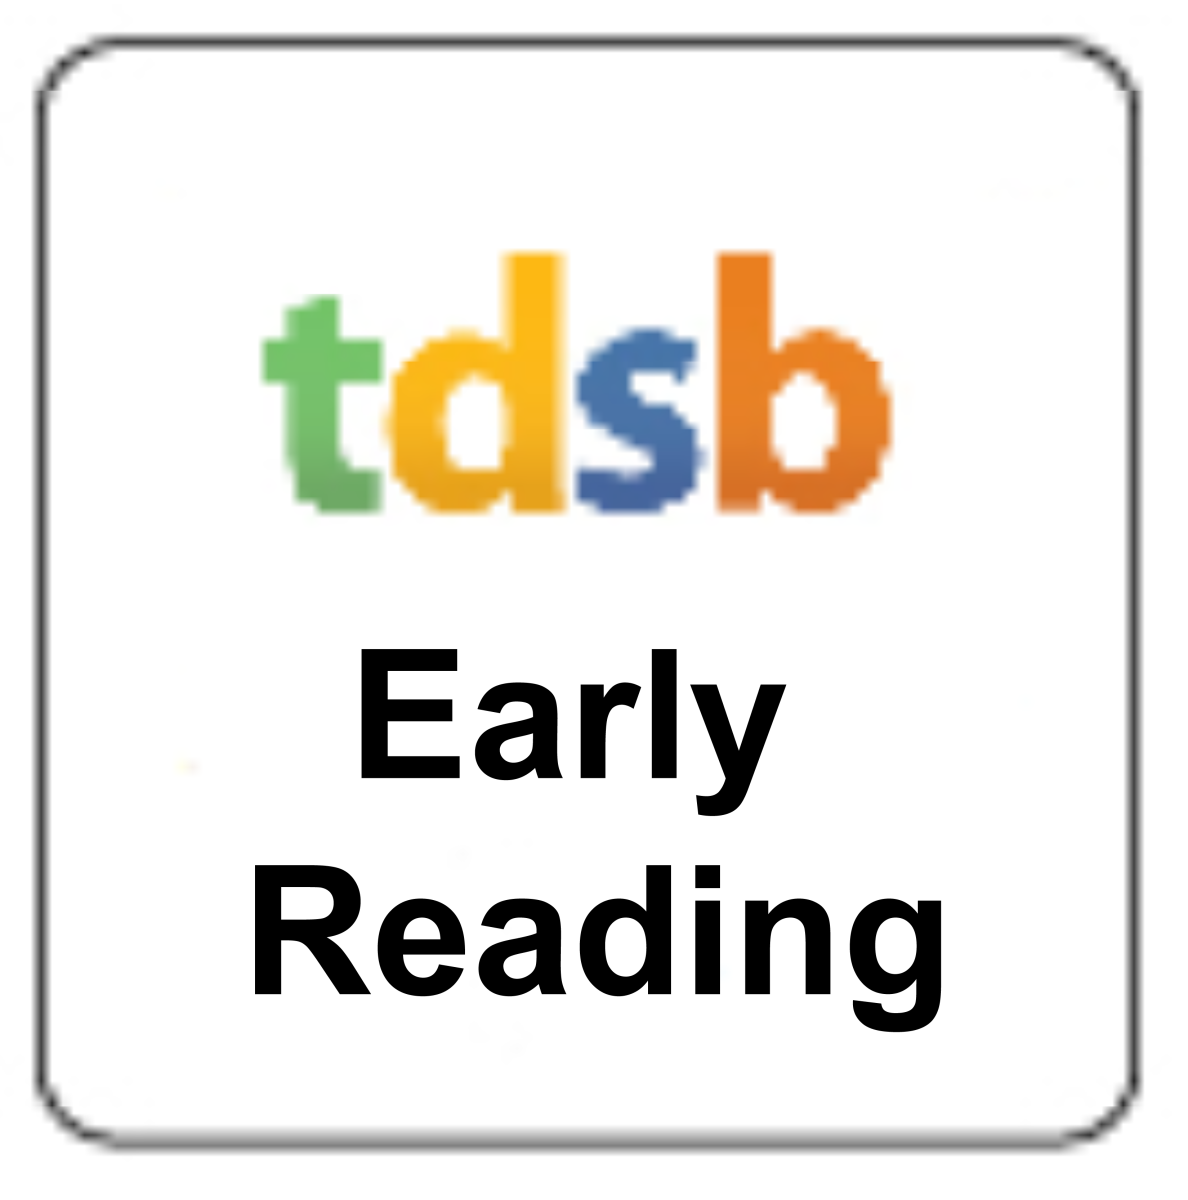 TDSB Early Reading